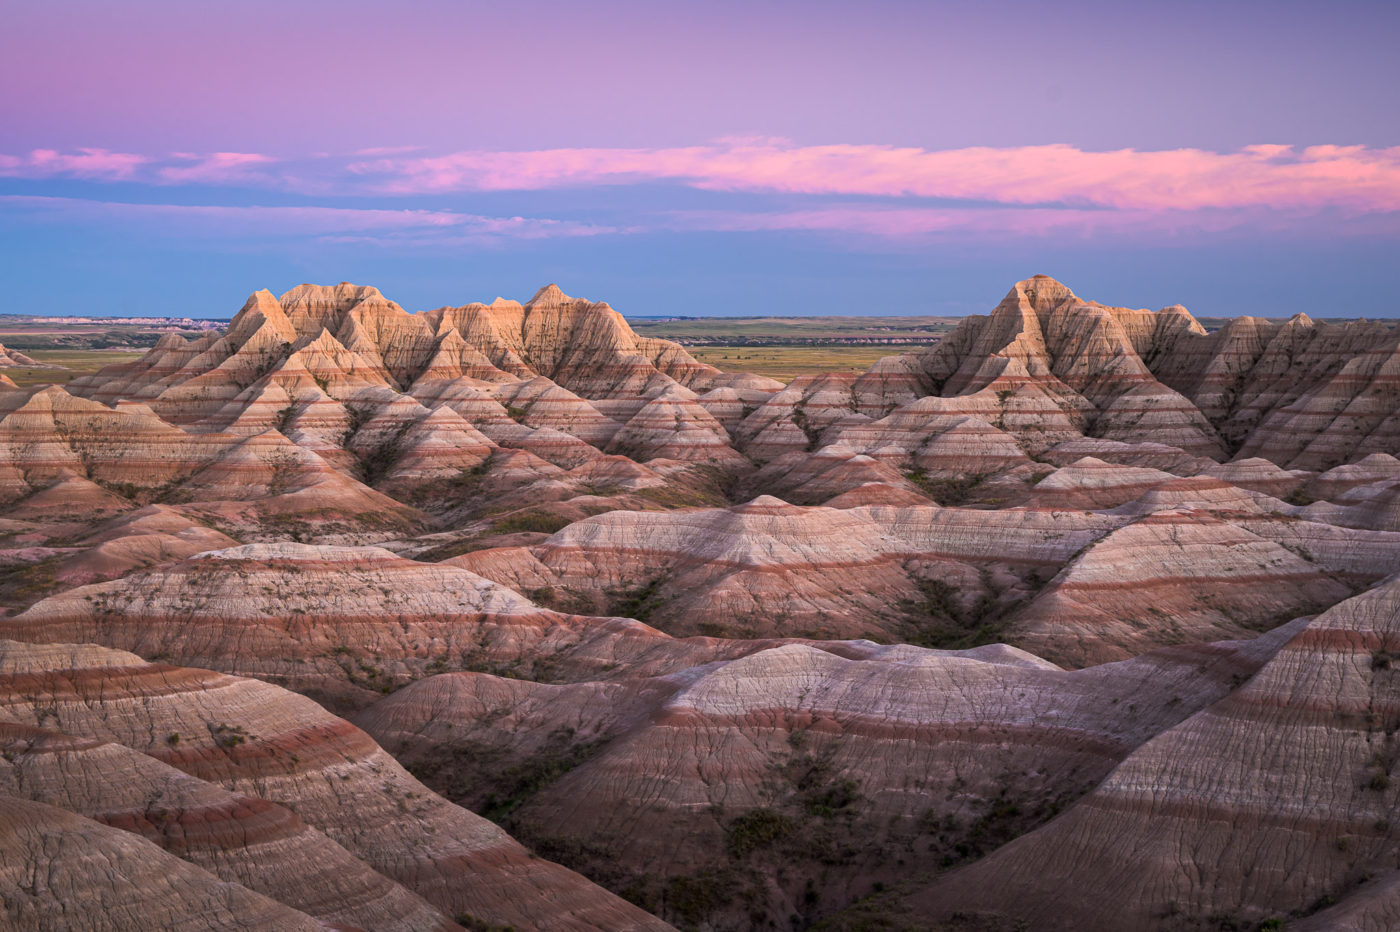 Dusk over the striated pinnacles and gullies of Badlands National Park in South Dakota, USA.